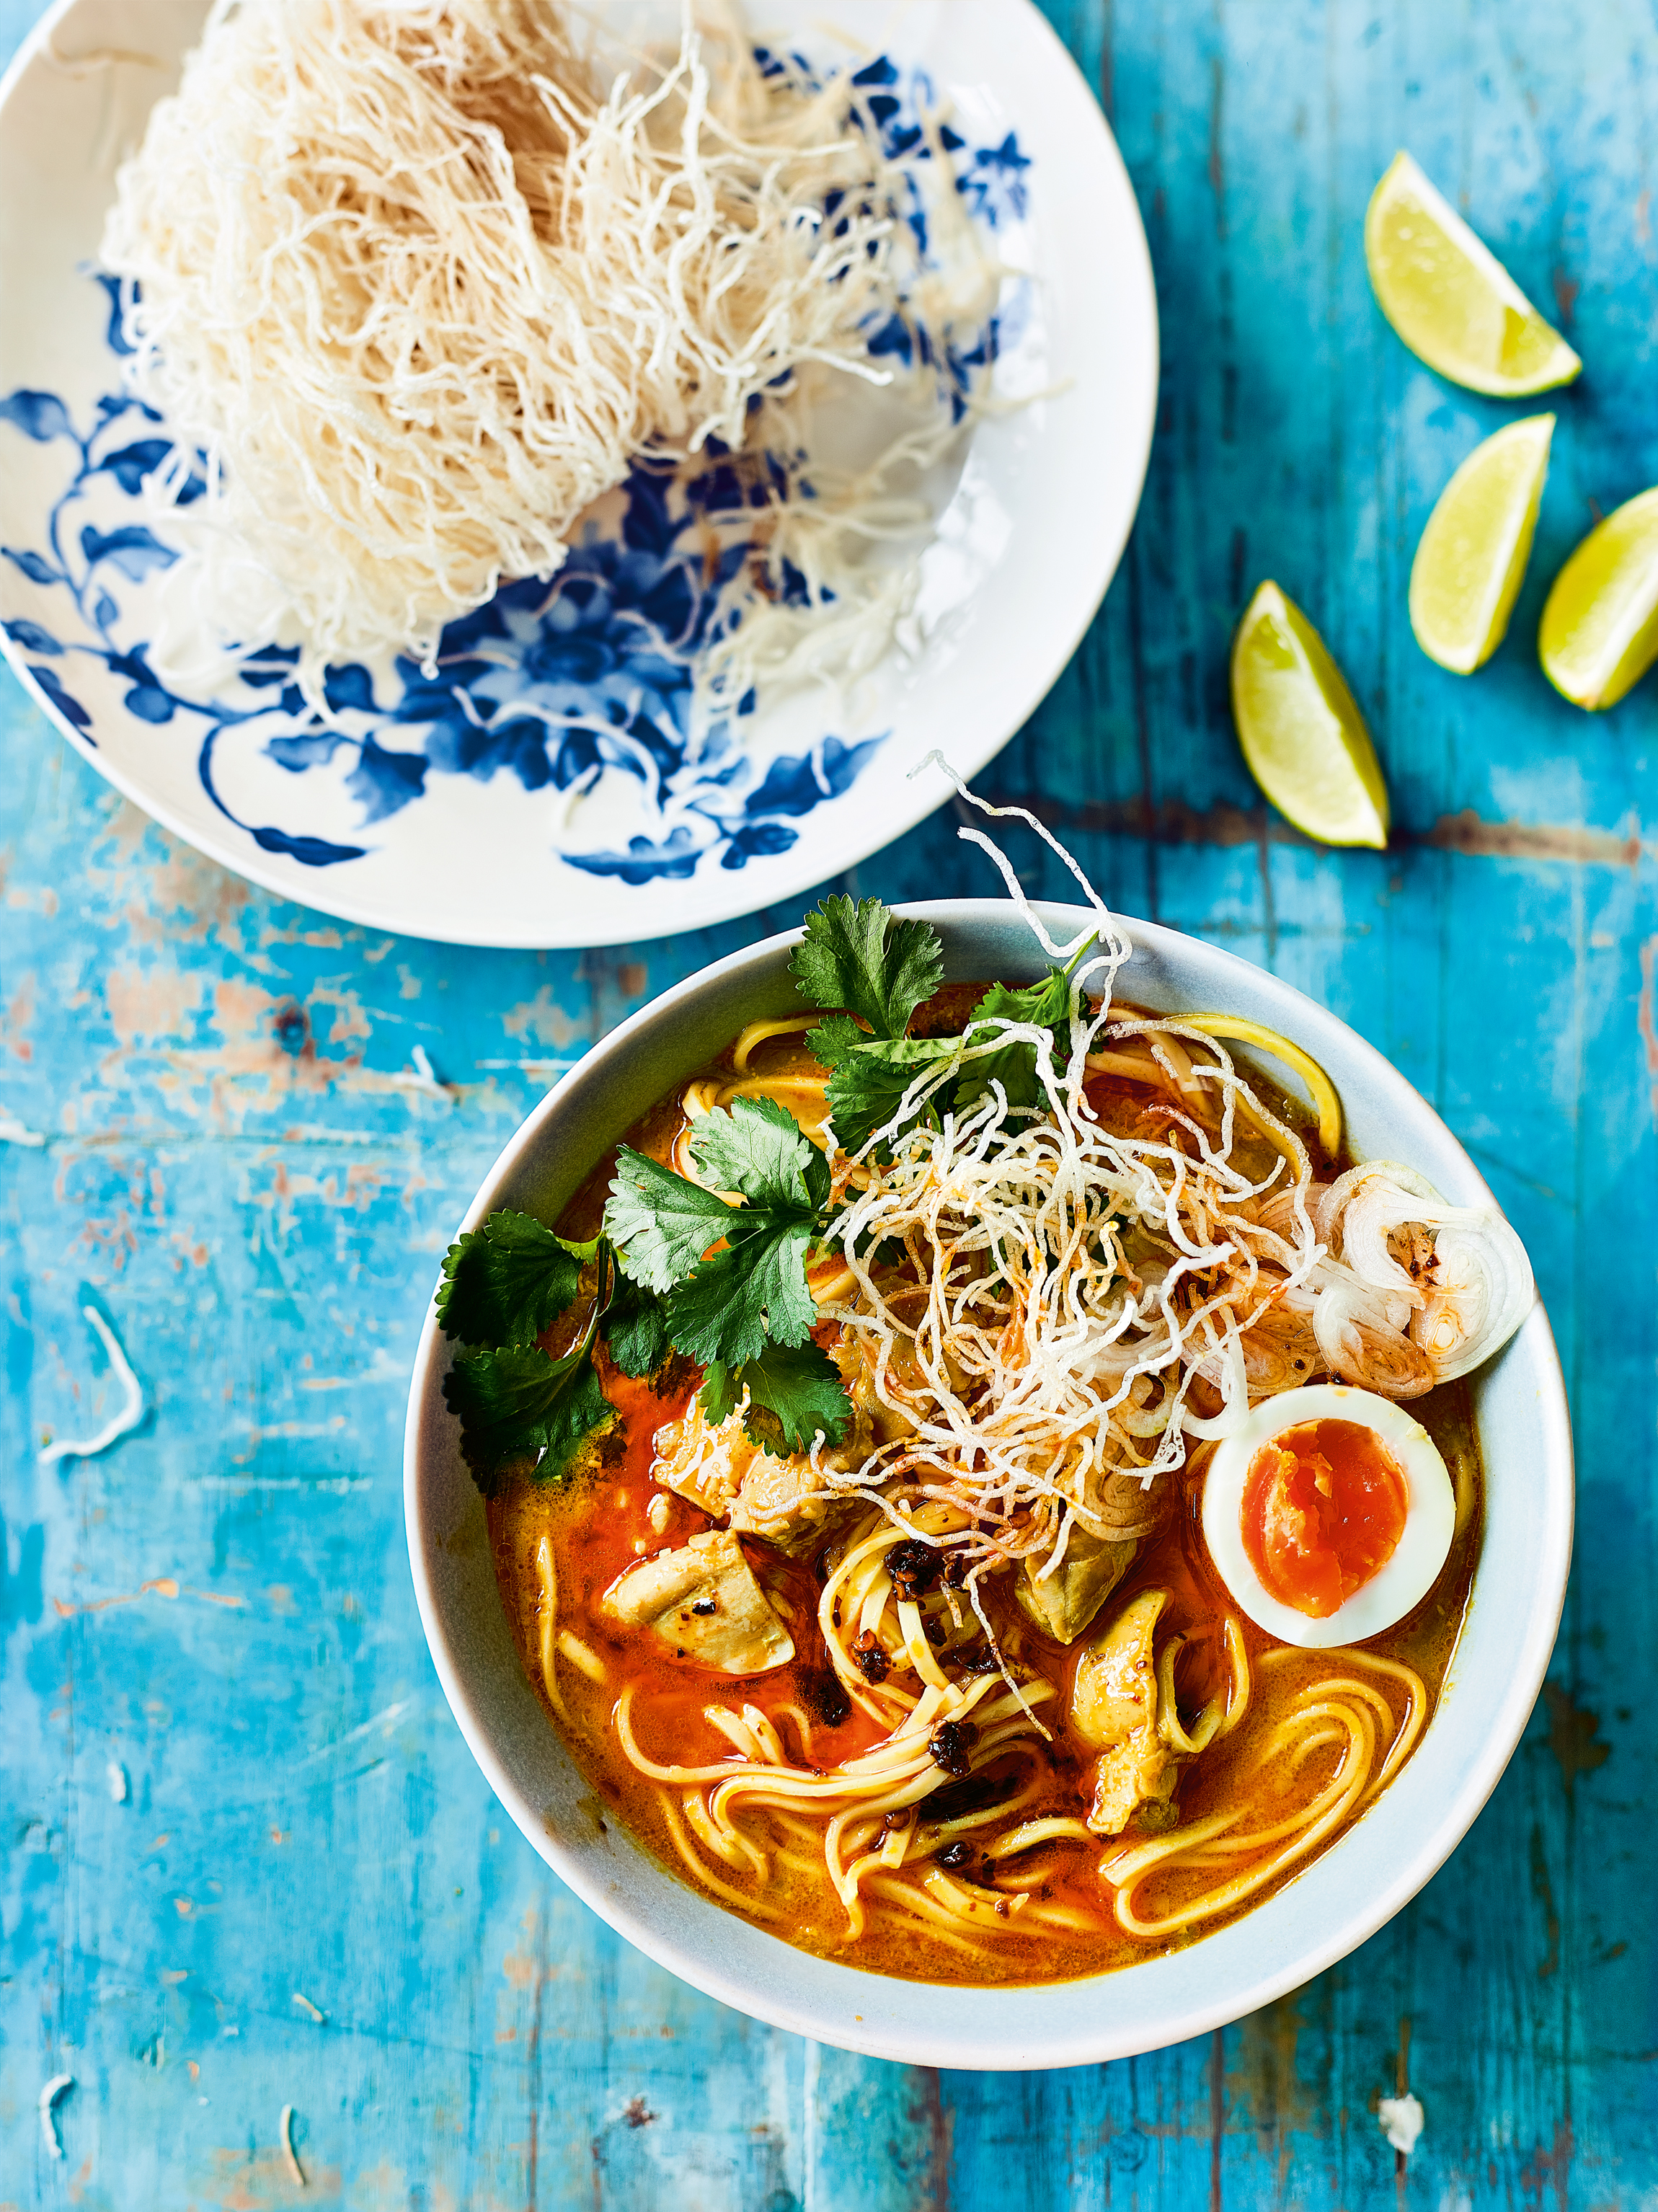 Coconut and chicken noodles